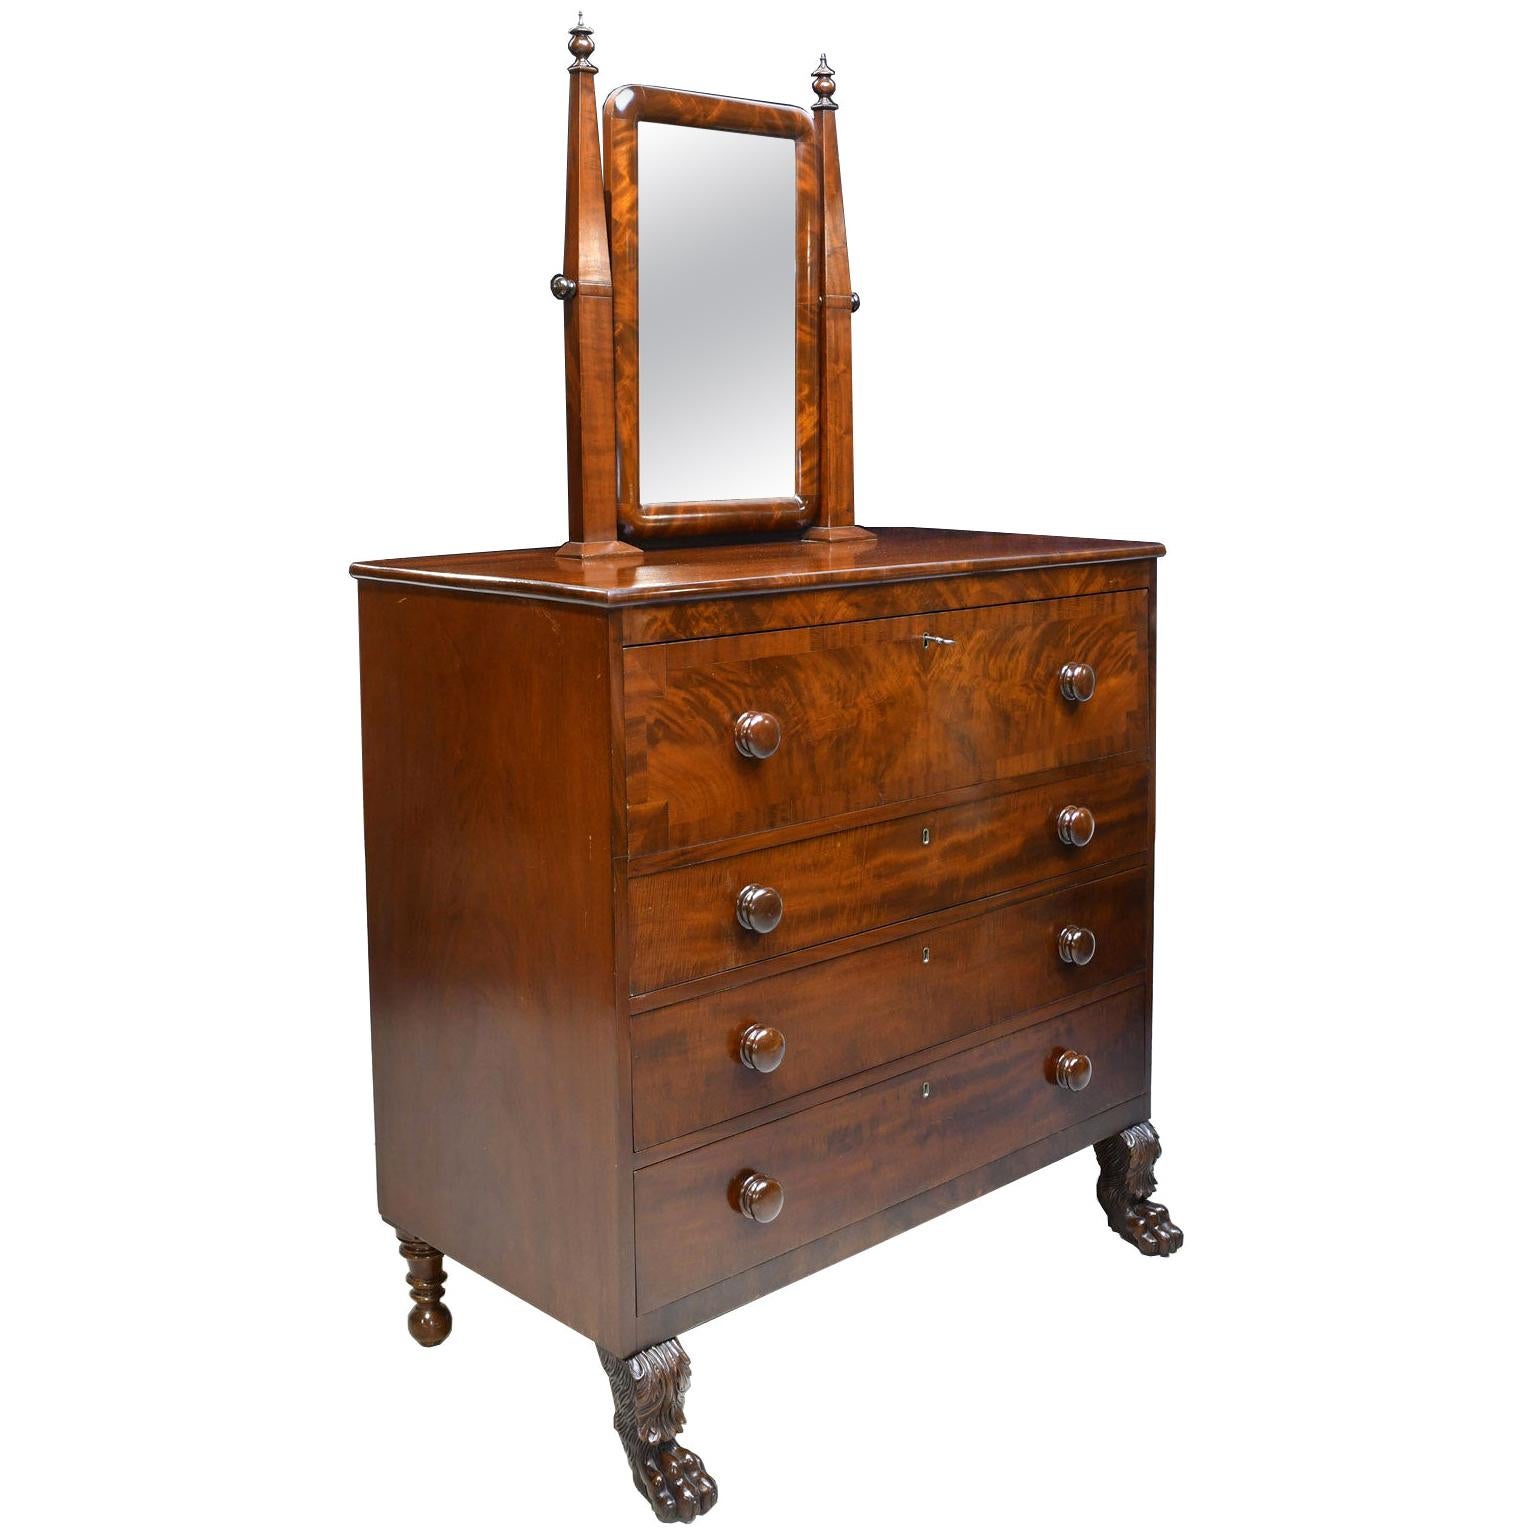 American Empire Chest of Drawers with Mirror in Mahogany, Maine, circa 1830